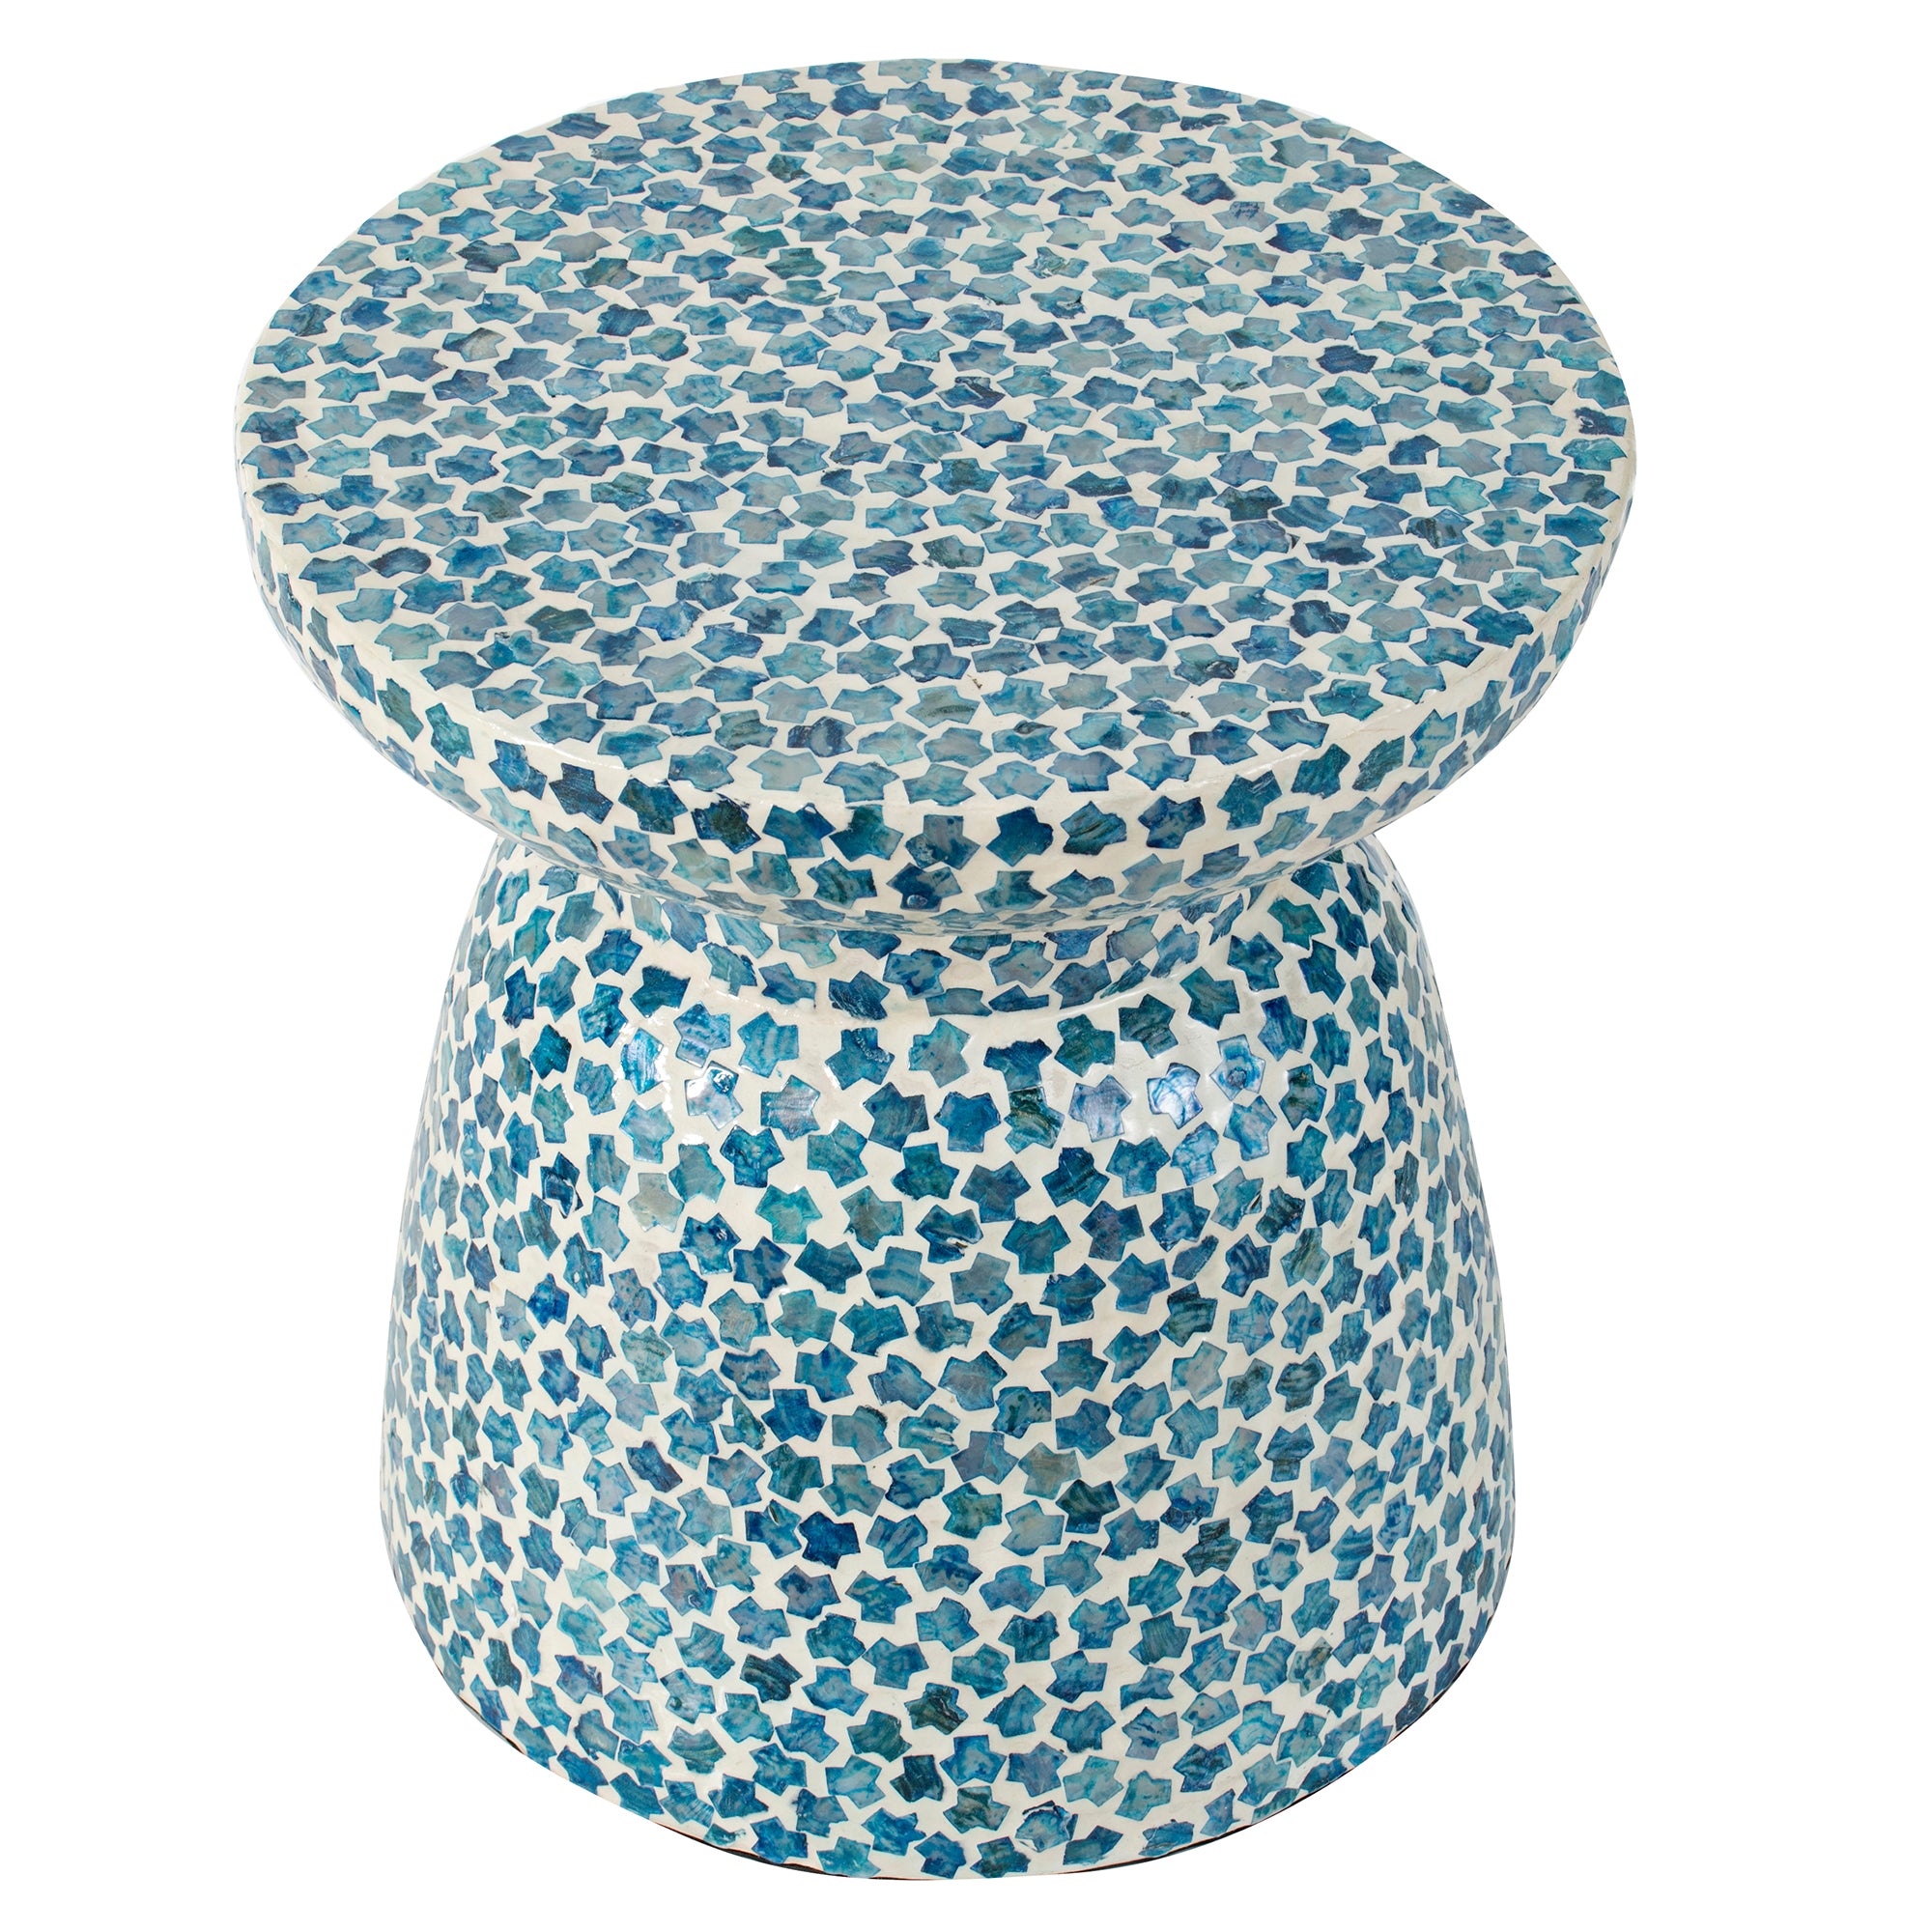 Shell inlay side table/Stool - decorstore